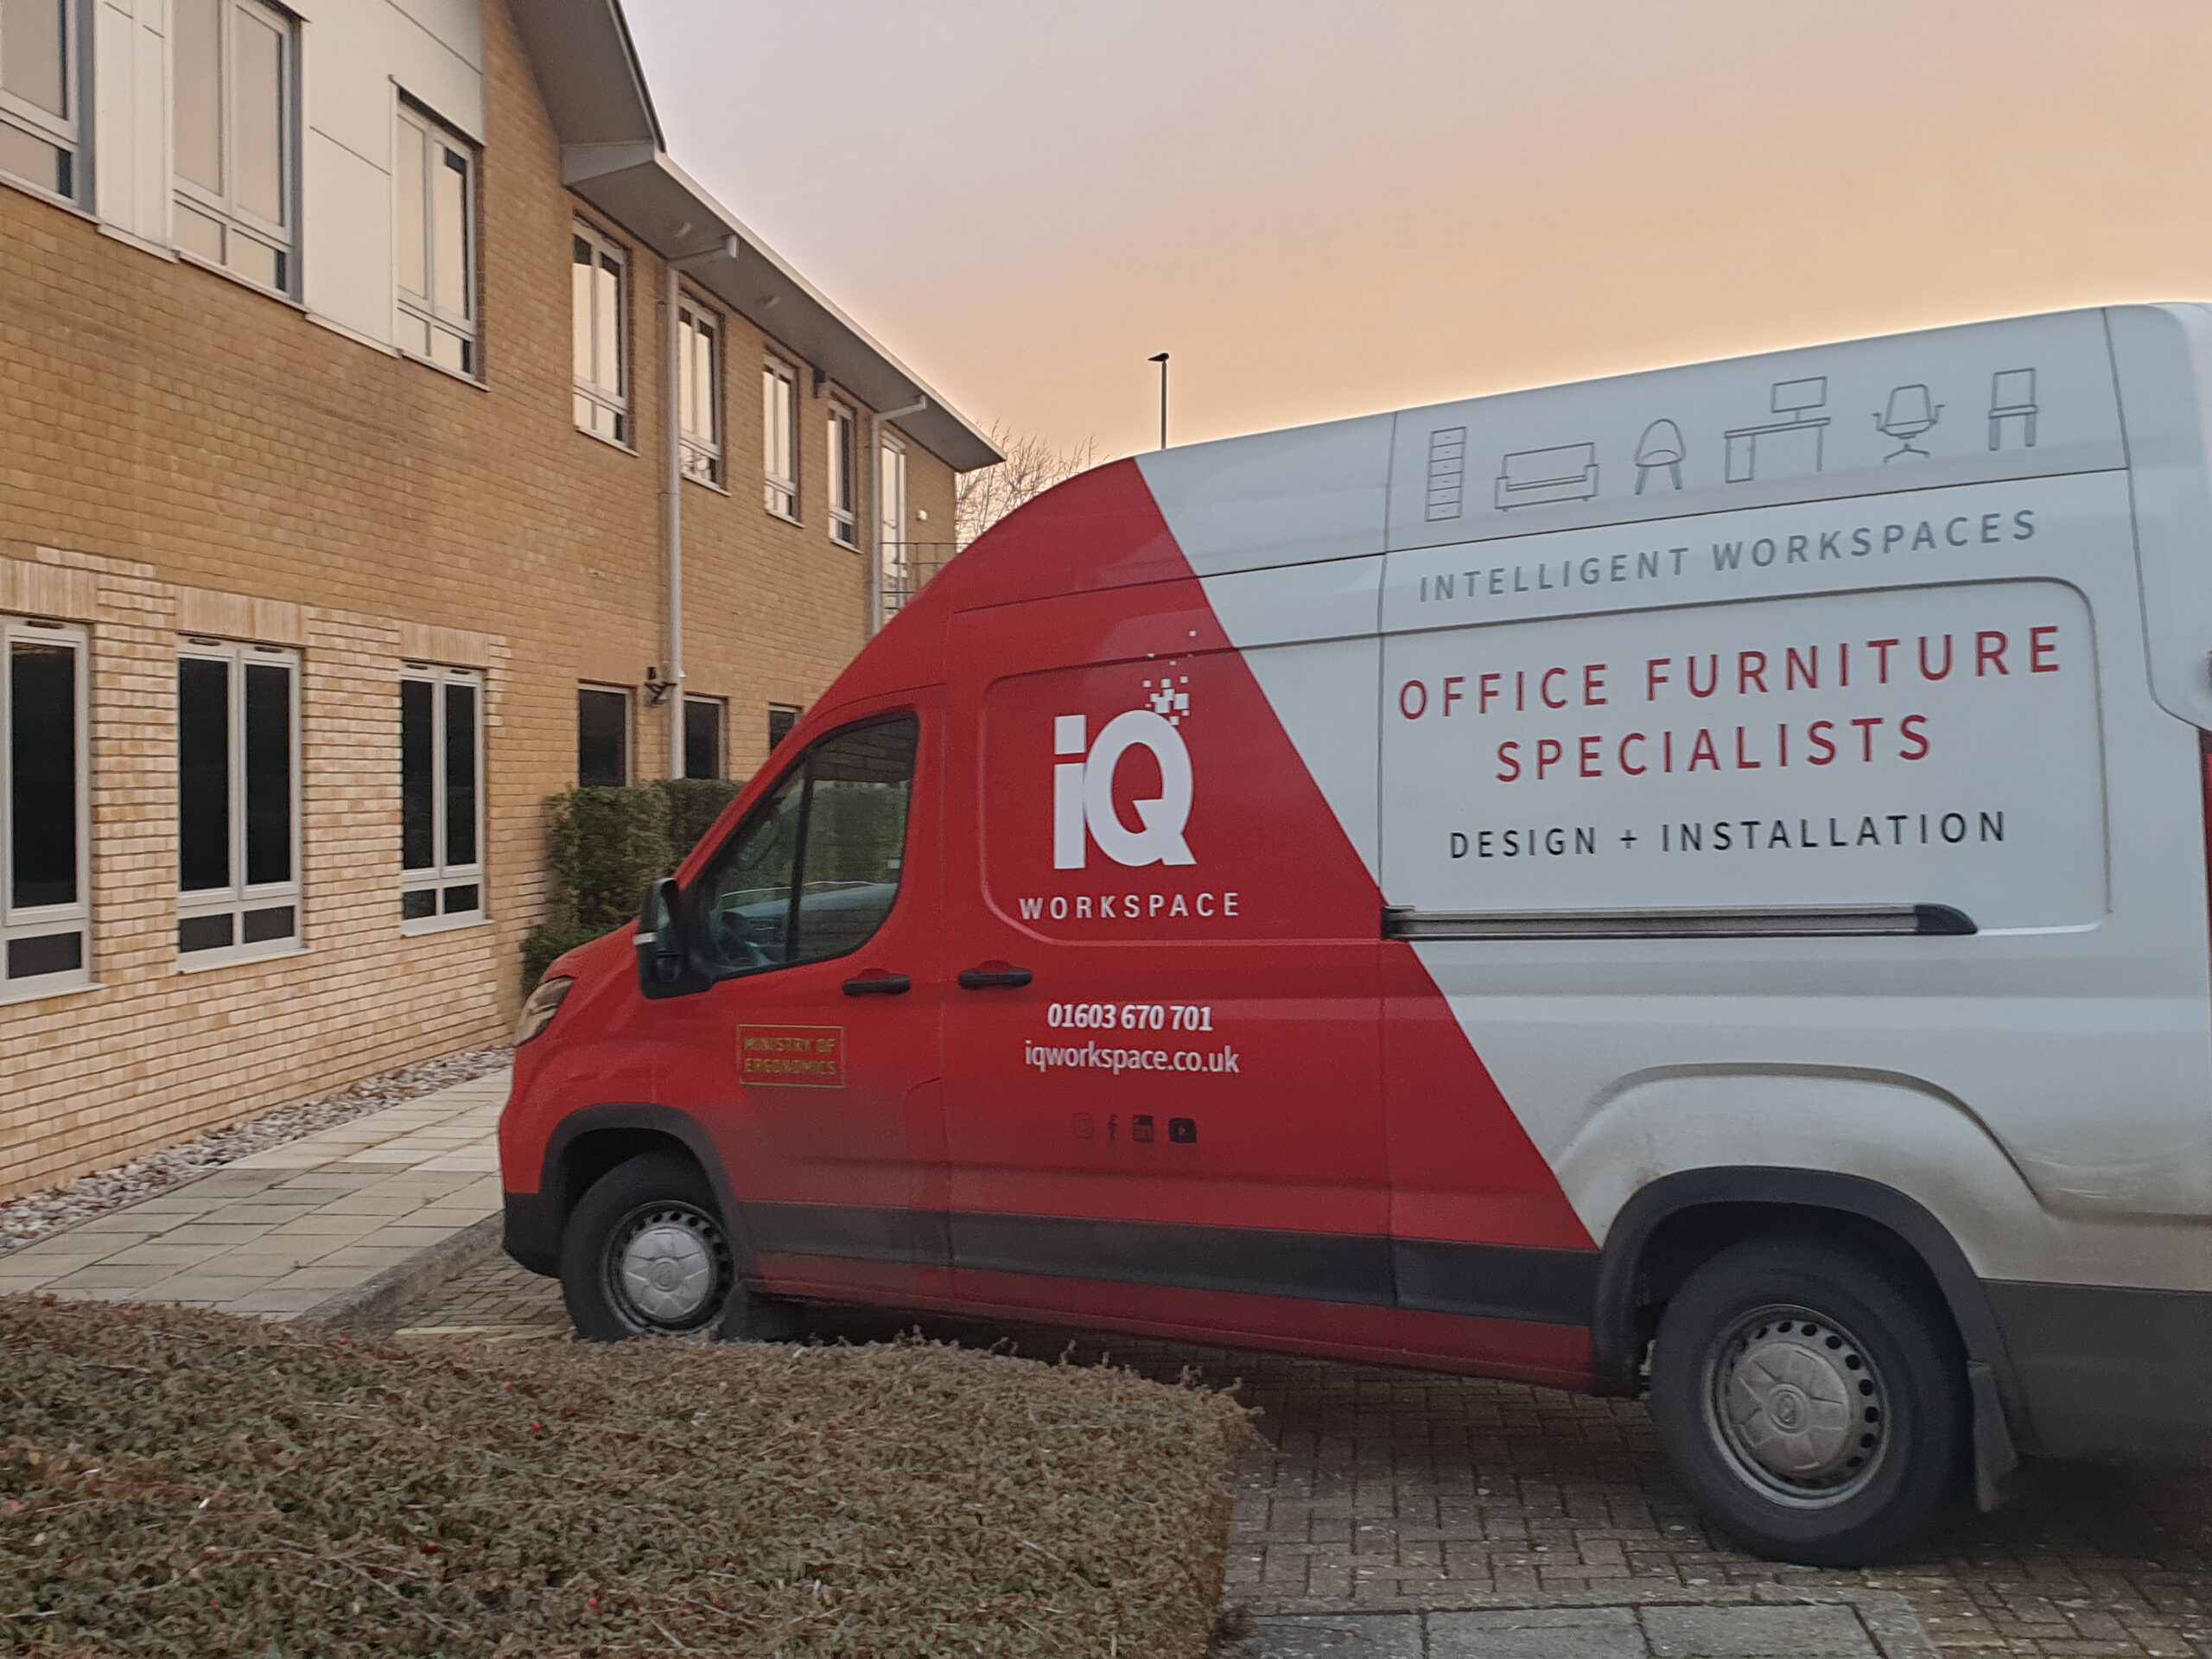 An image of the iQ Workspace office furniture delivery van parked up. It is red and white.